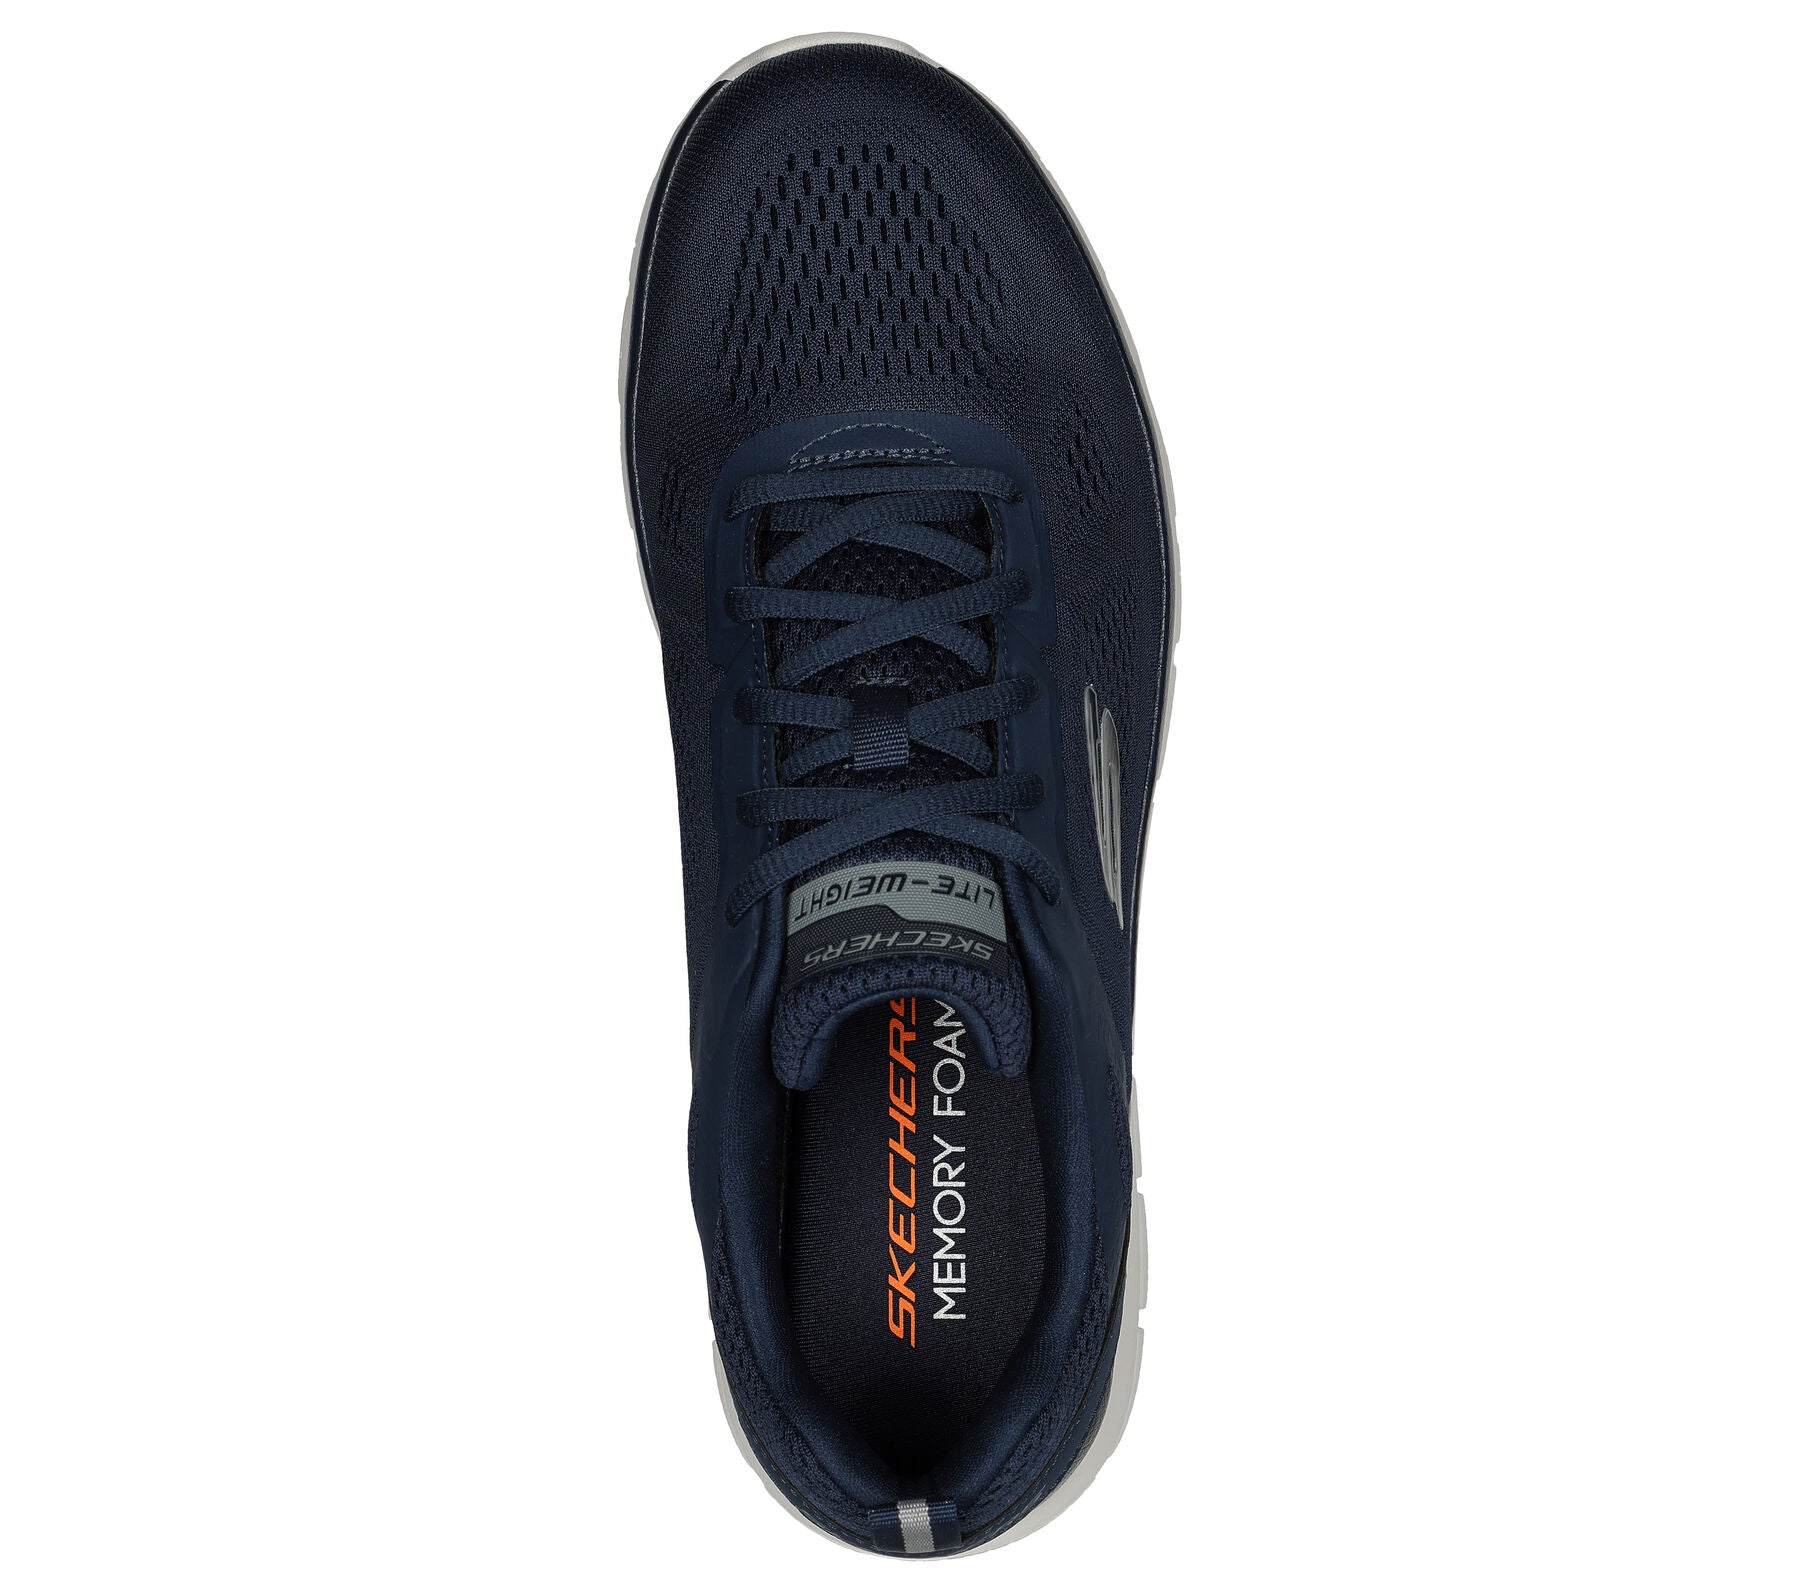     Skechers Track - Broader vegan trainers with Memory Foam insole.